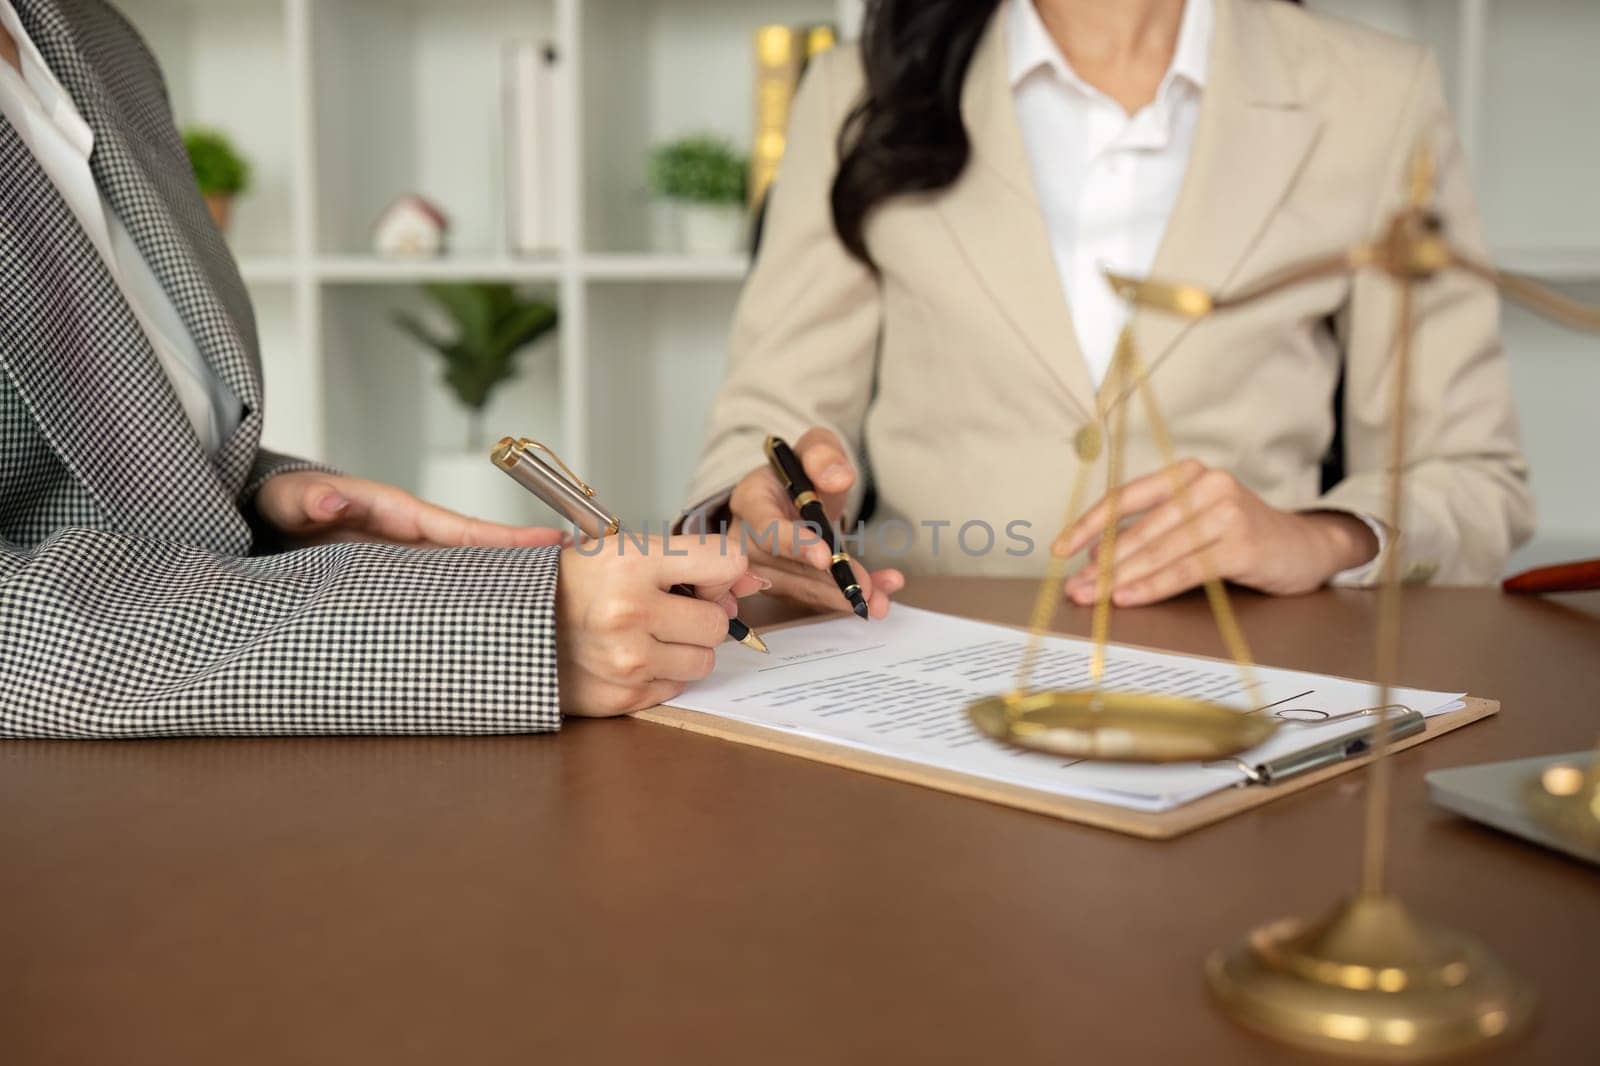 A lawyer and a businesswoman are discussing legal advice on signing a business contract. Signing an insurance or financial contract.